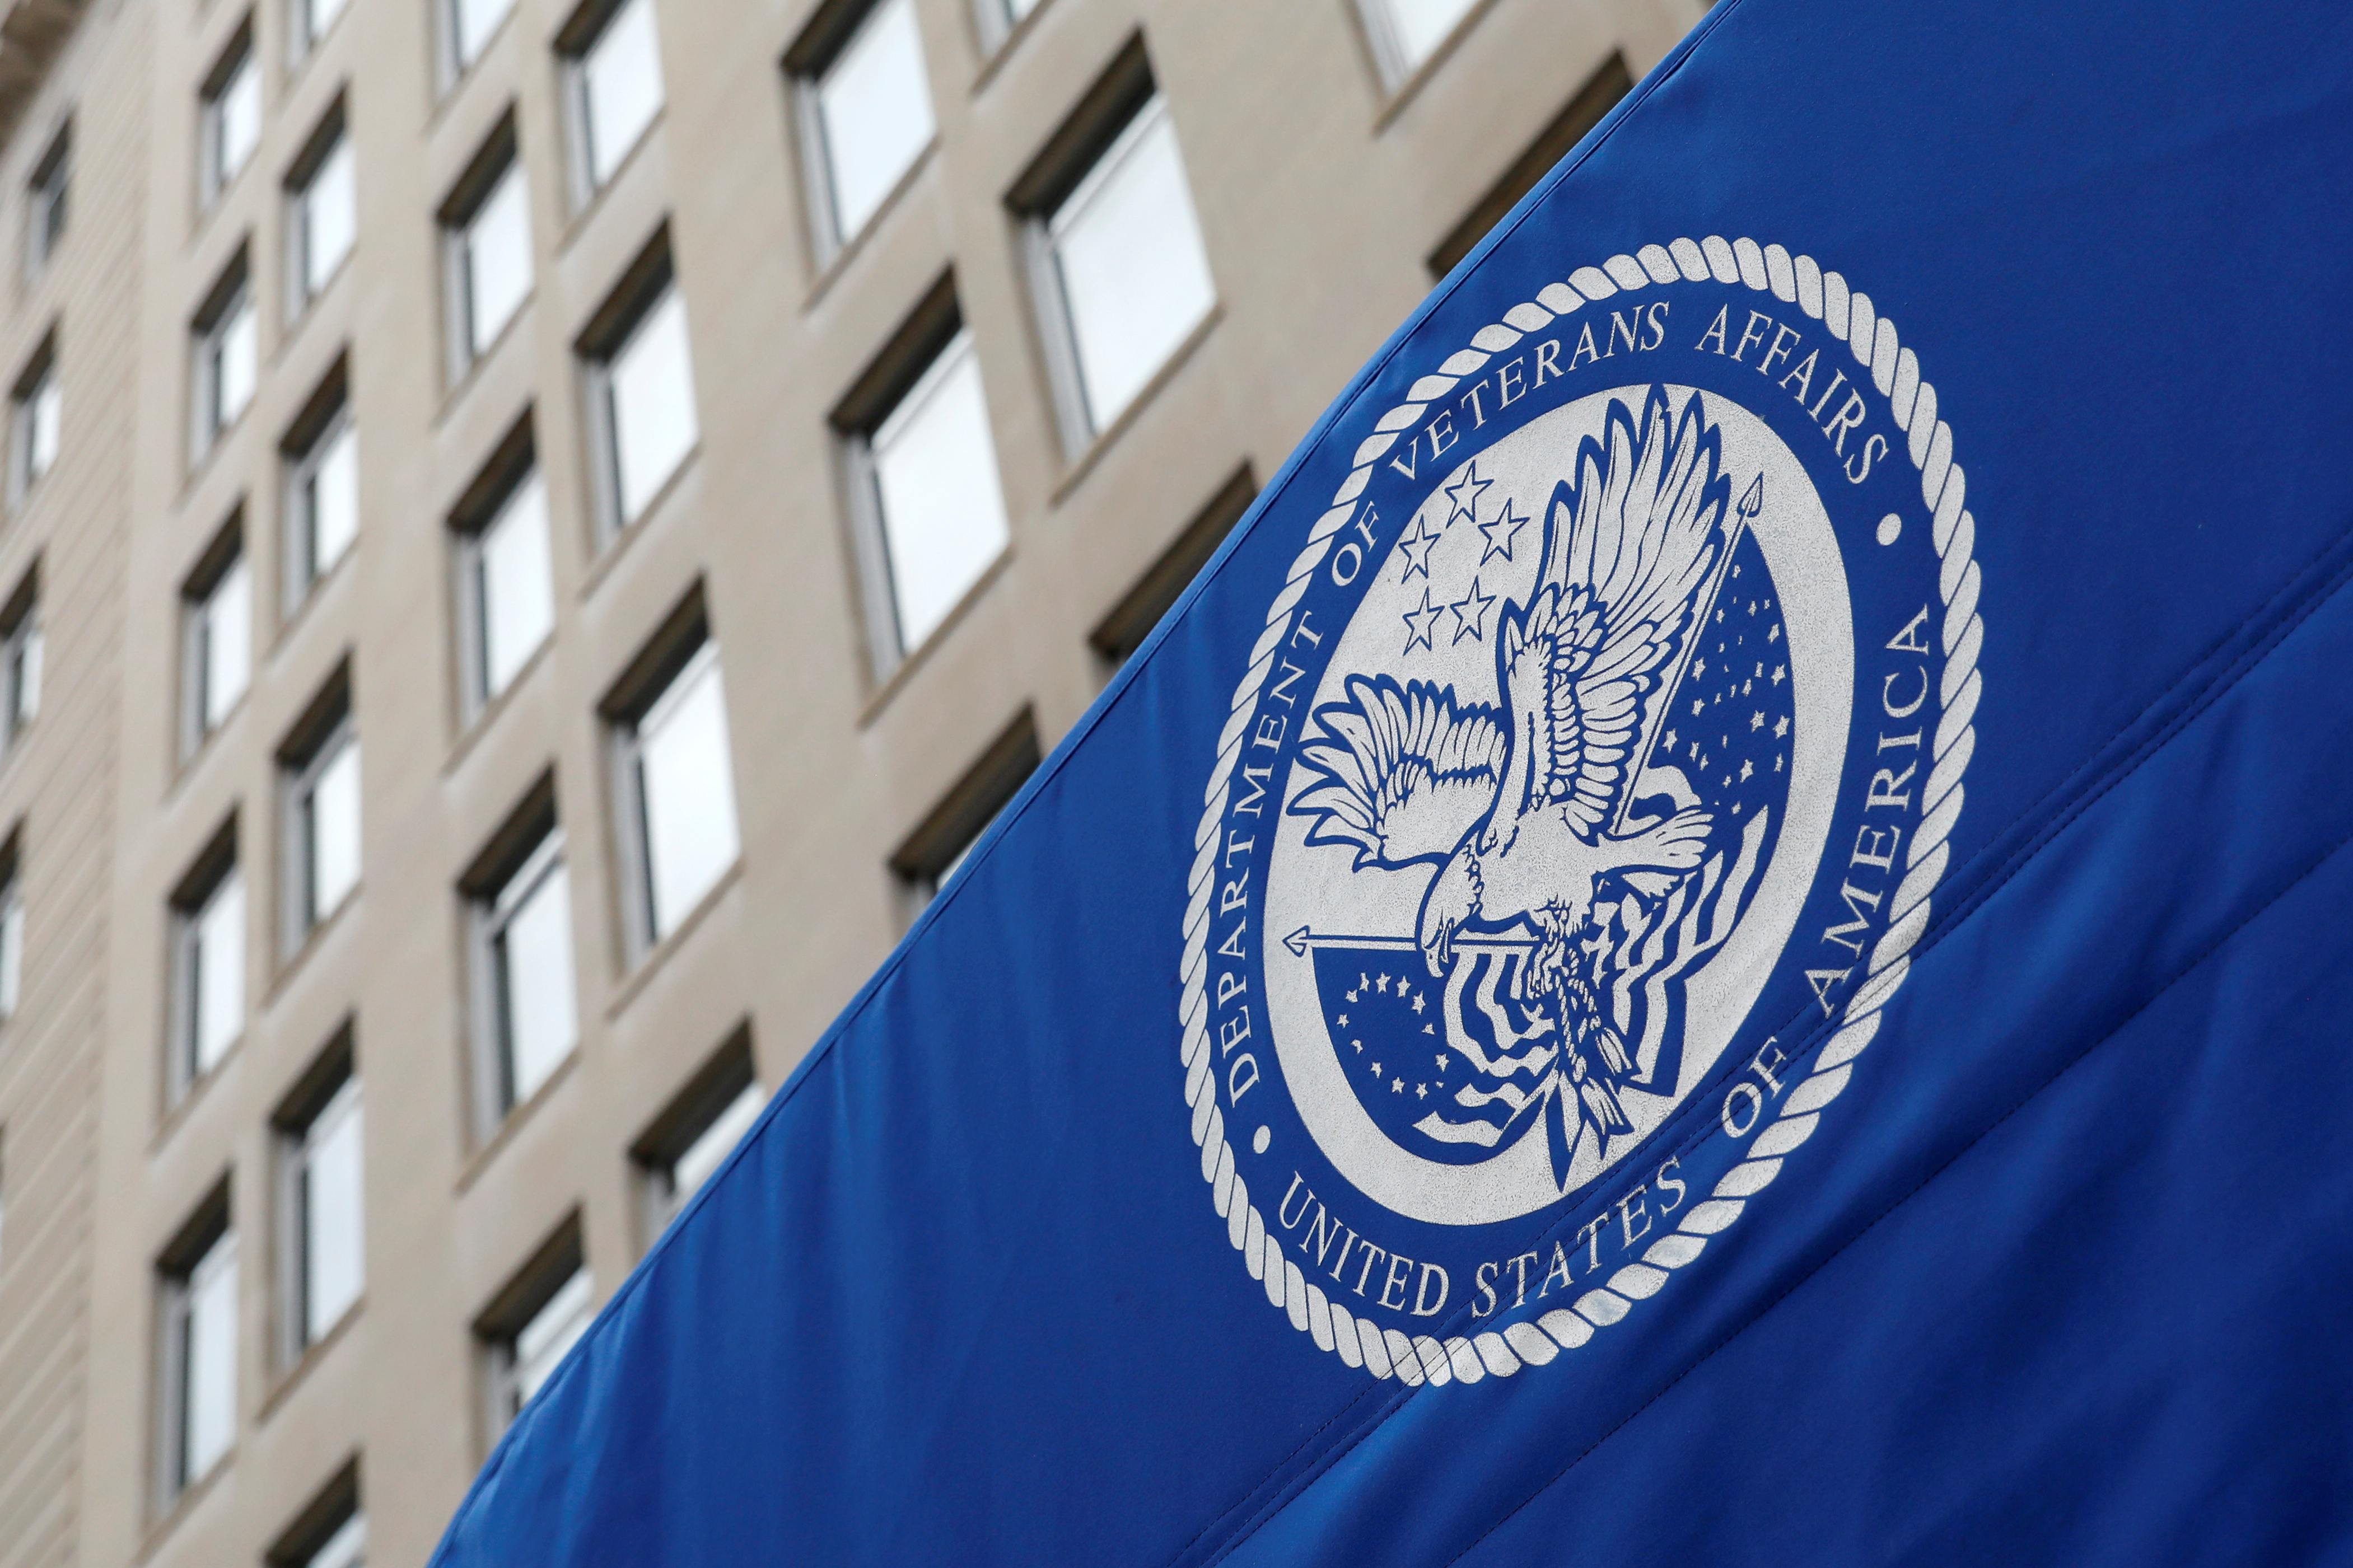 The seal of the United States Department of Veterans Affairs is seen outside of their office in Washington, D.C.